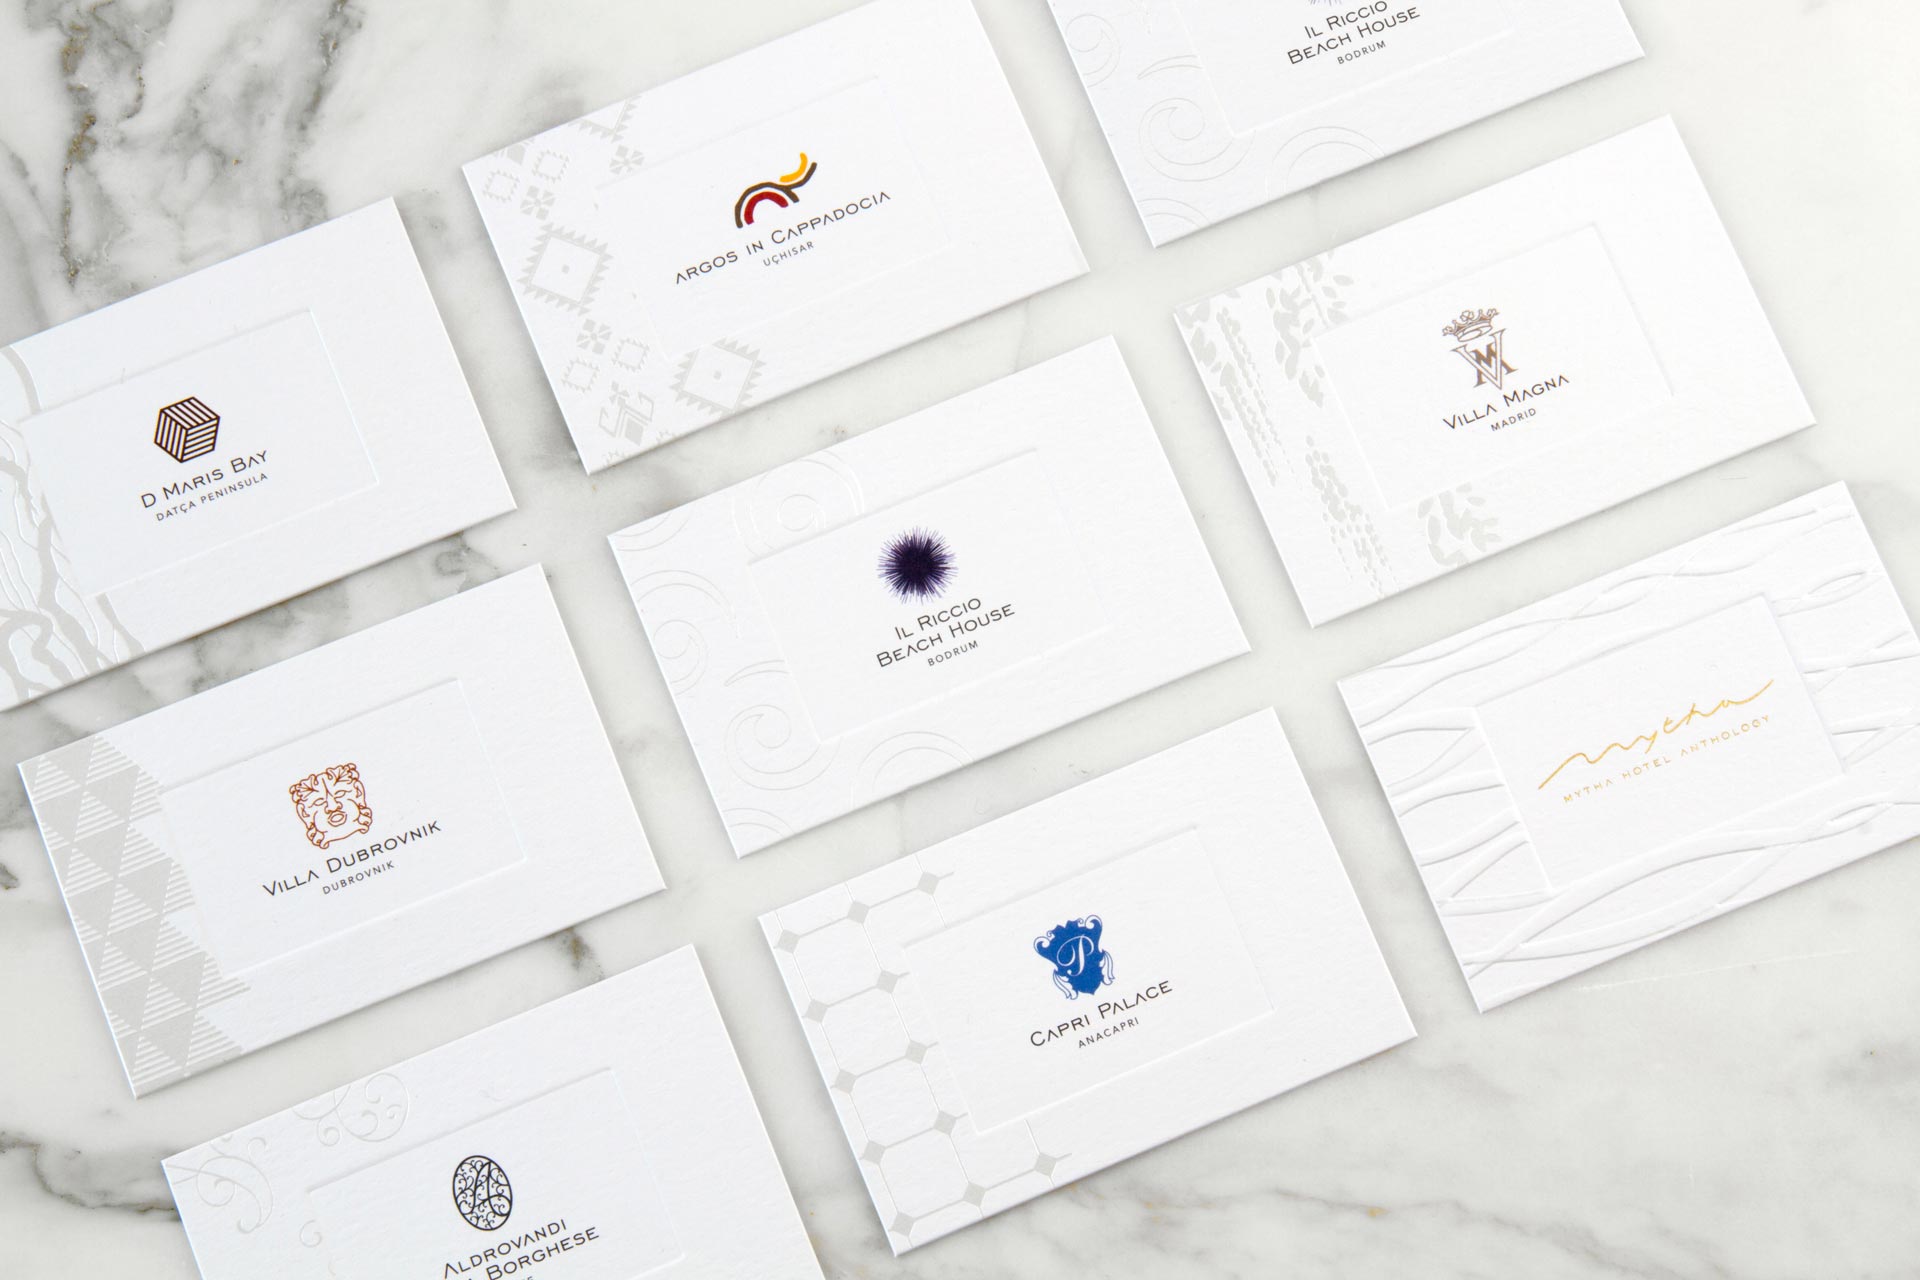 15:03 design, set of business cards. Branding and visual identity for Mytha Hotel Anthology, a chain of luxury hotels in the Mediterranean Sea.